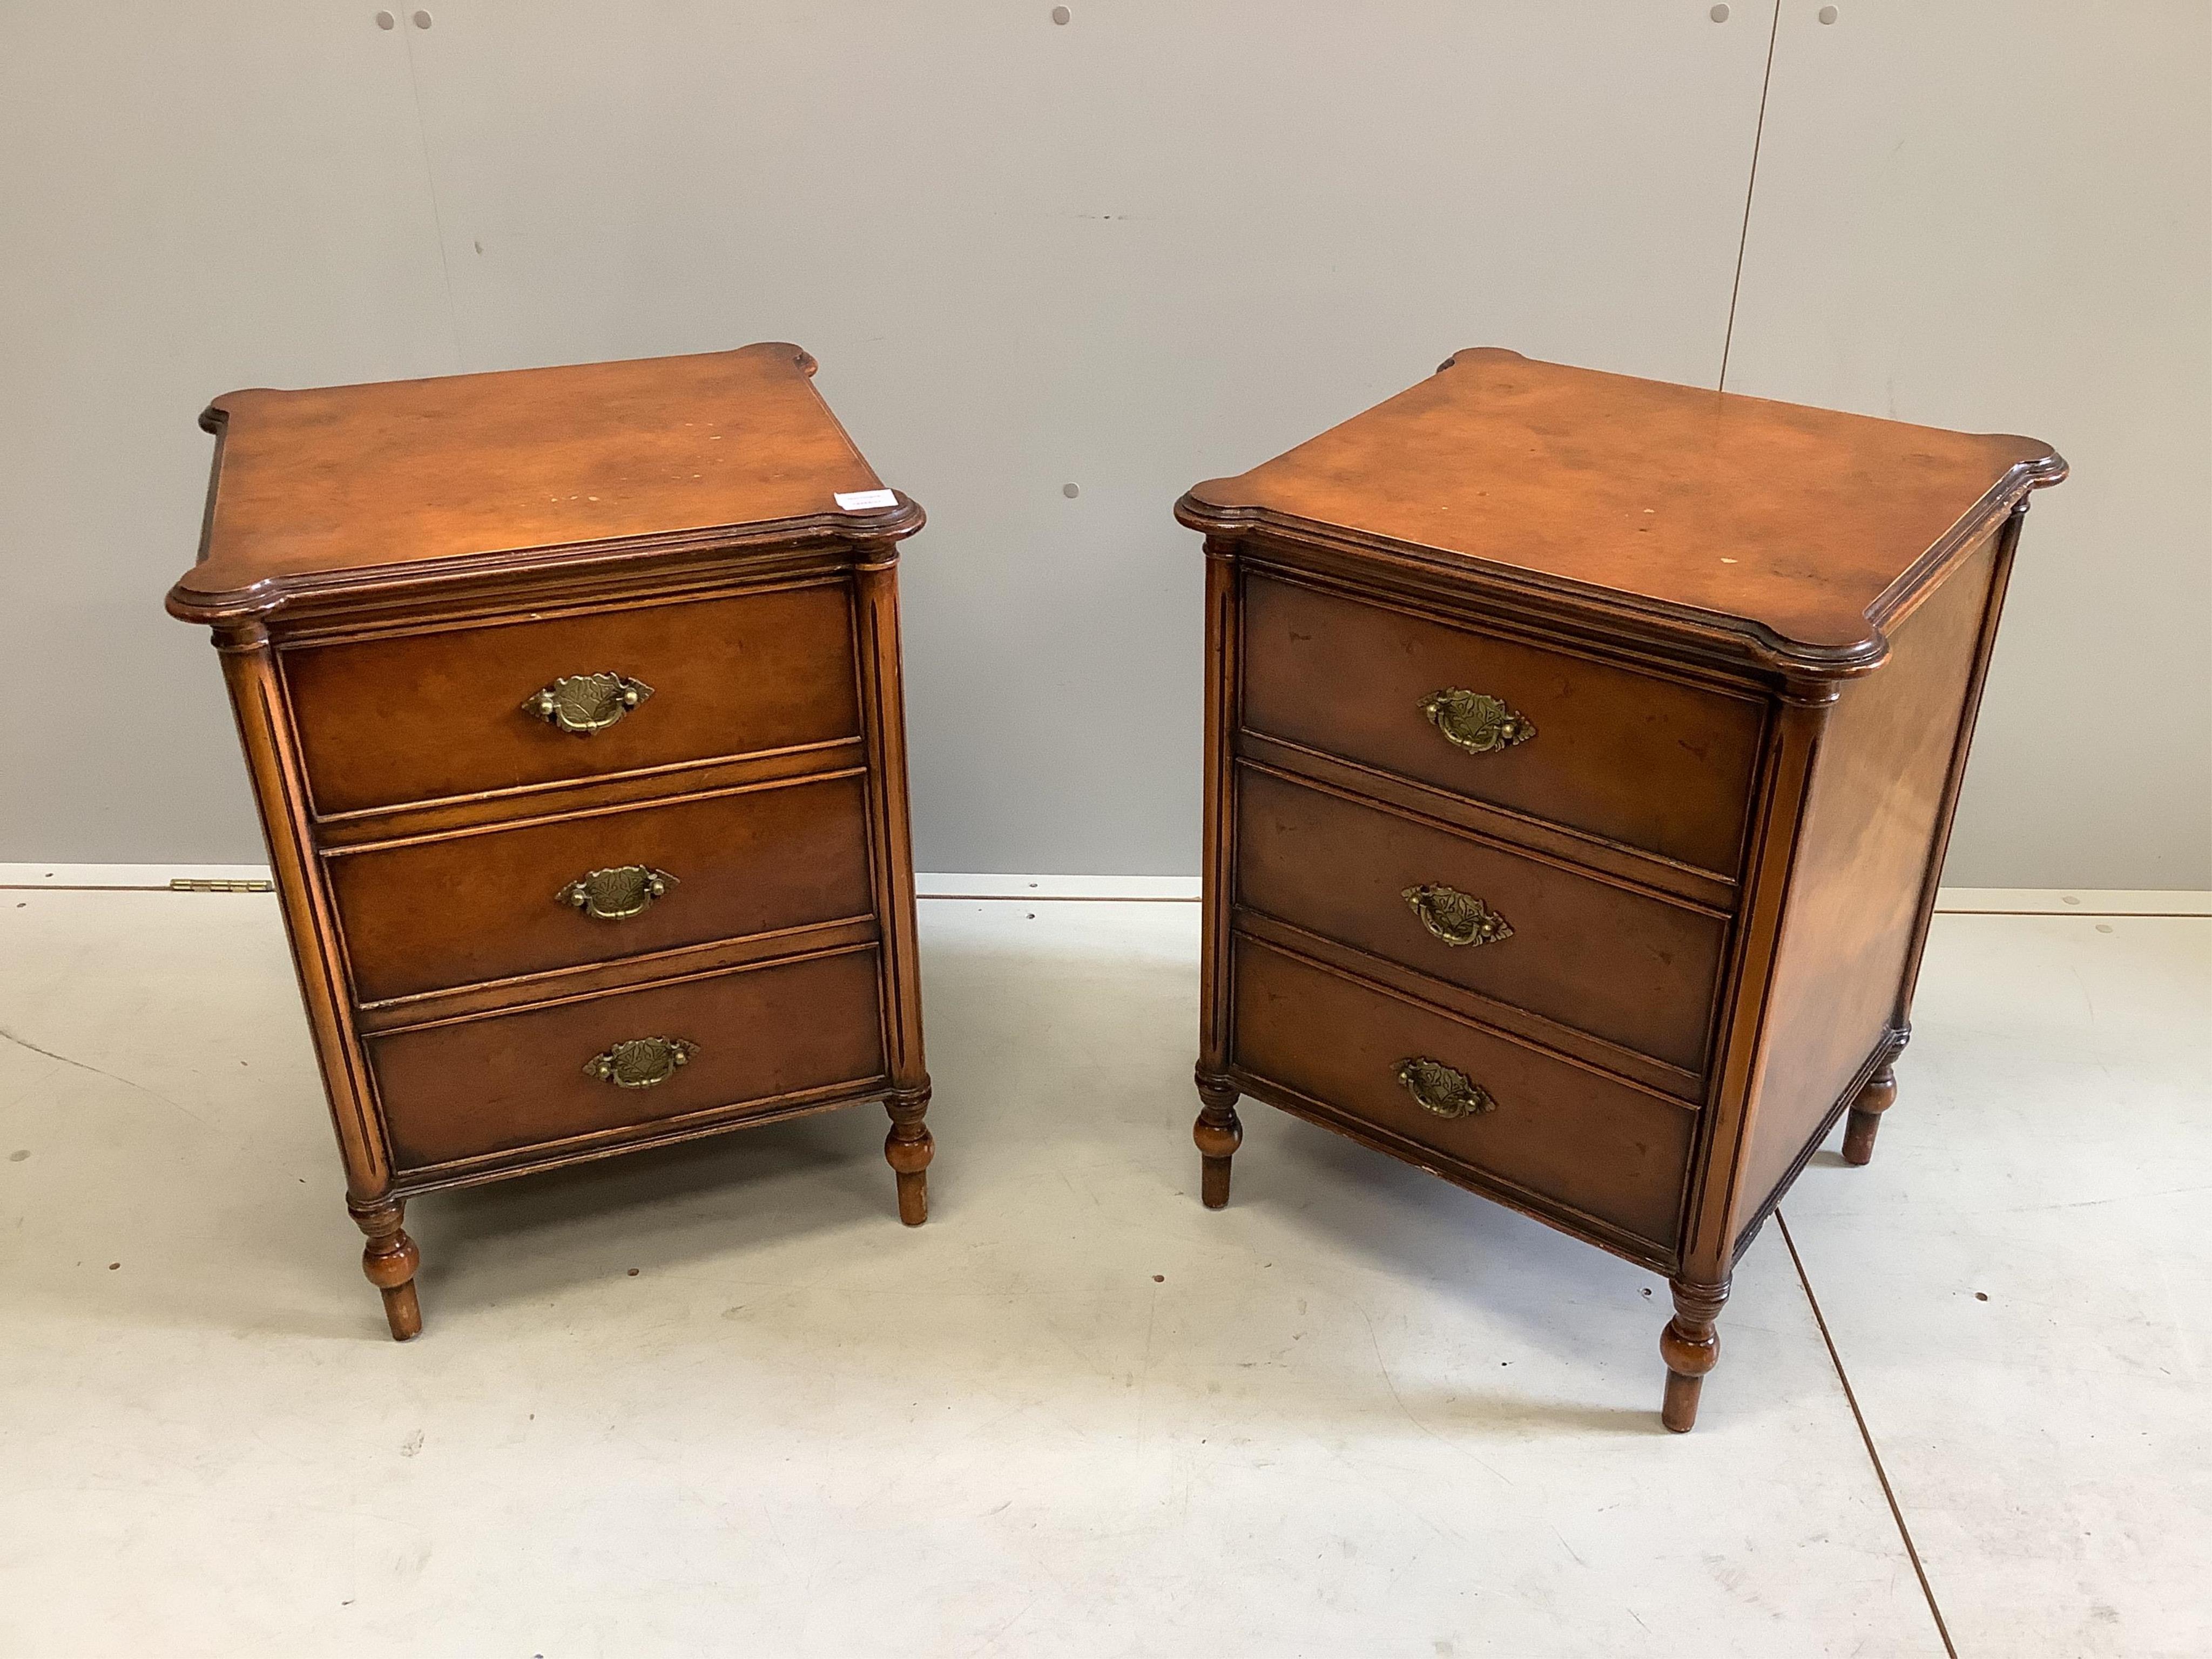 A pair of reproduction George I style three drawer bedside chests, width 50cm, depth 46cm, height 65cm. Condition - fair